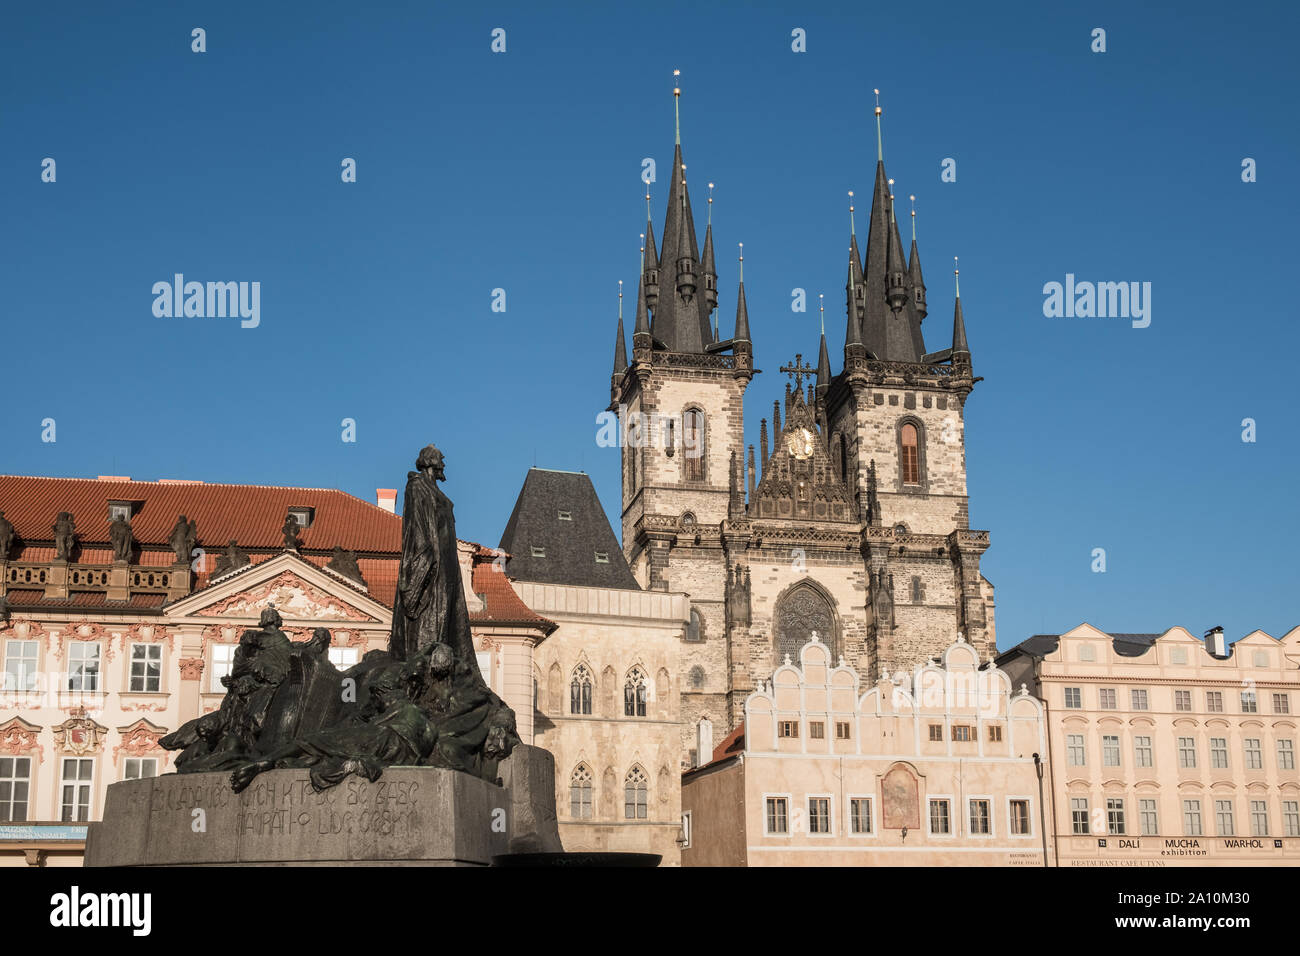 Jan Hus memorial and exterior gothic towers of Church of our Lady before Tyn, Old Town Square, Stare Mesto, Prague, Czech Republic Stock Photo